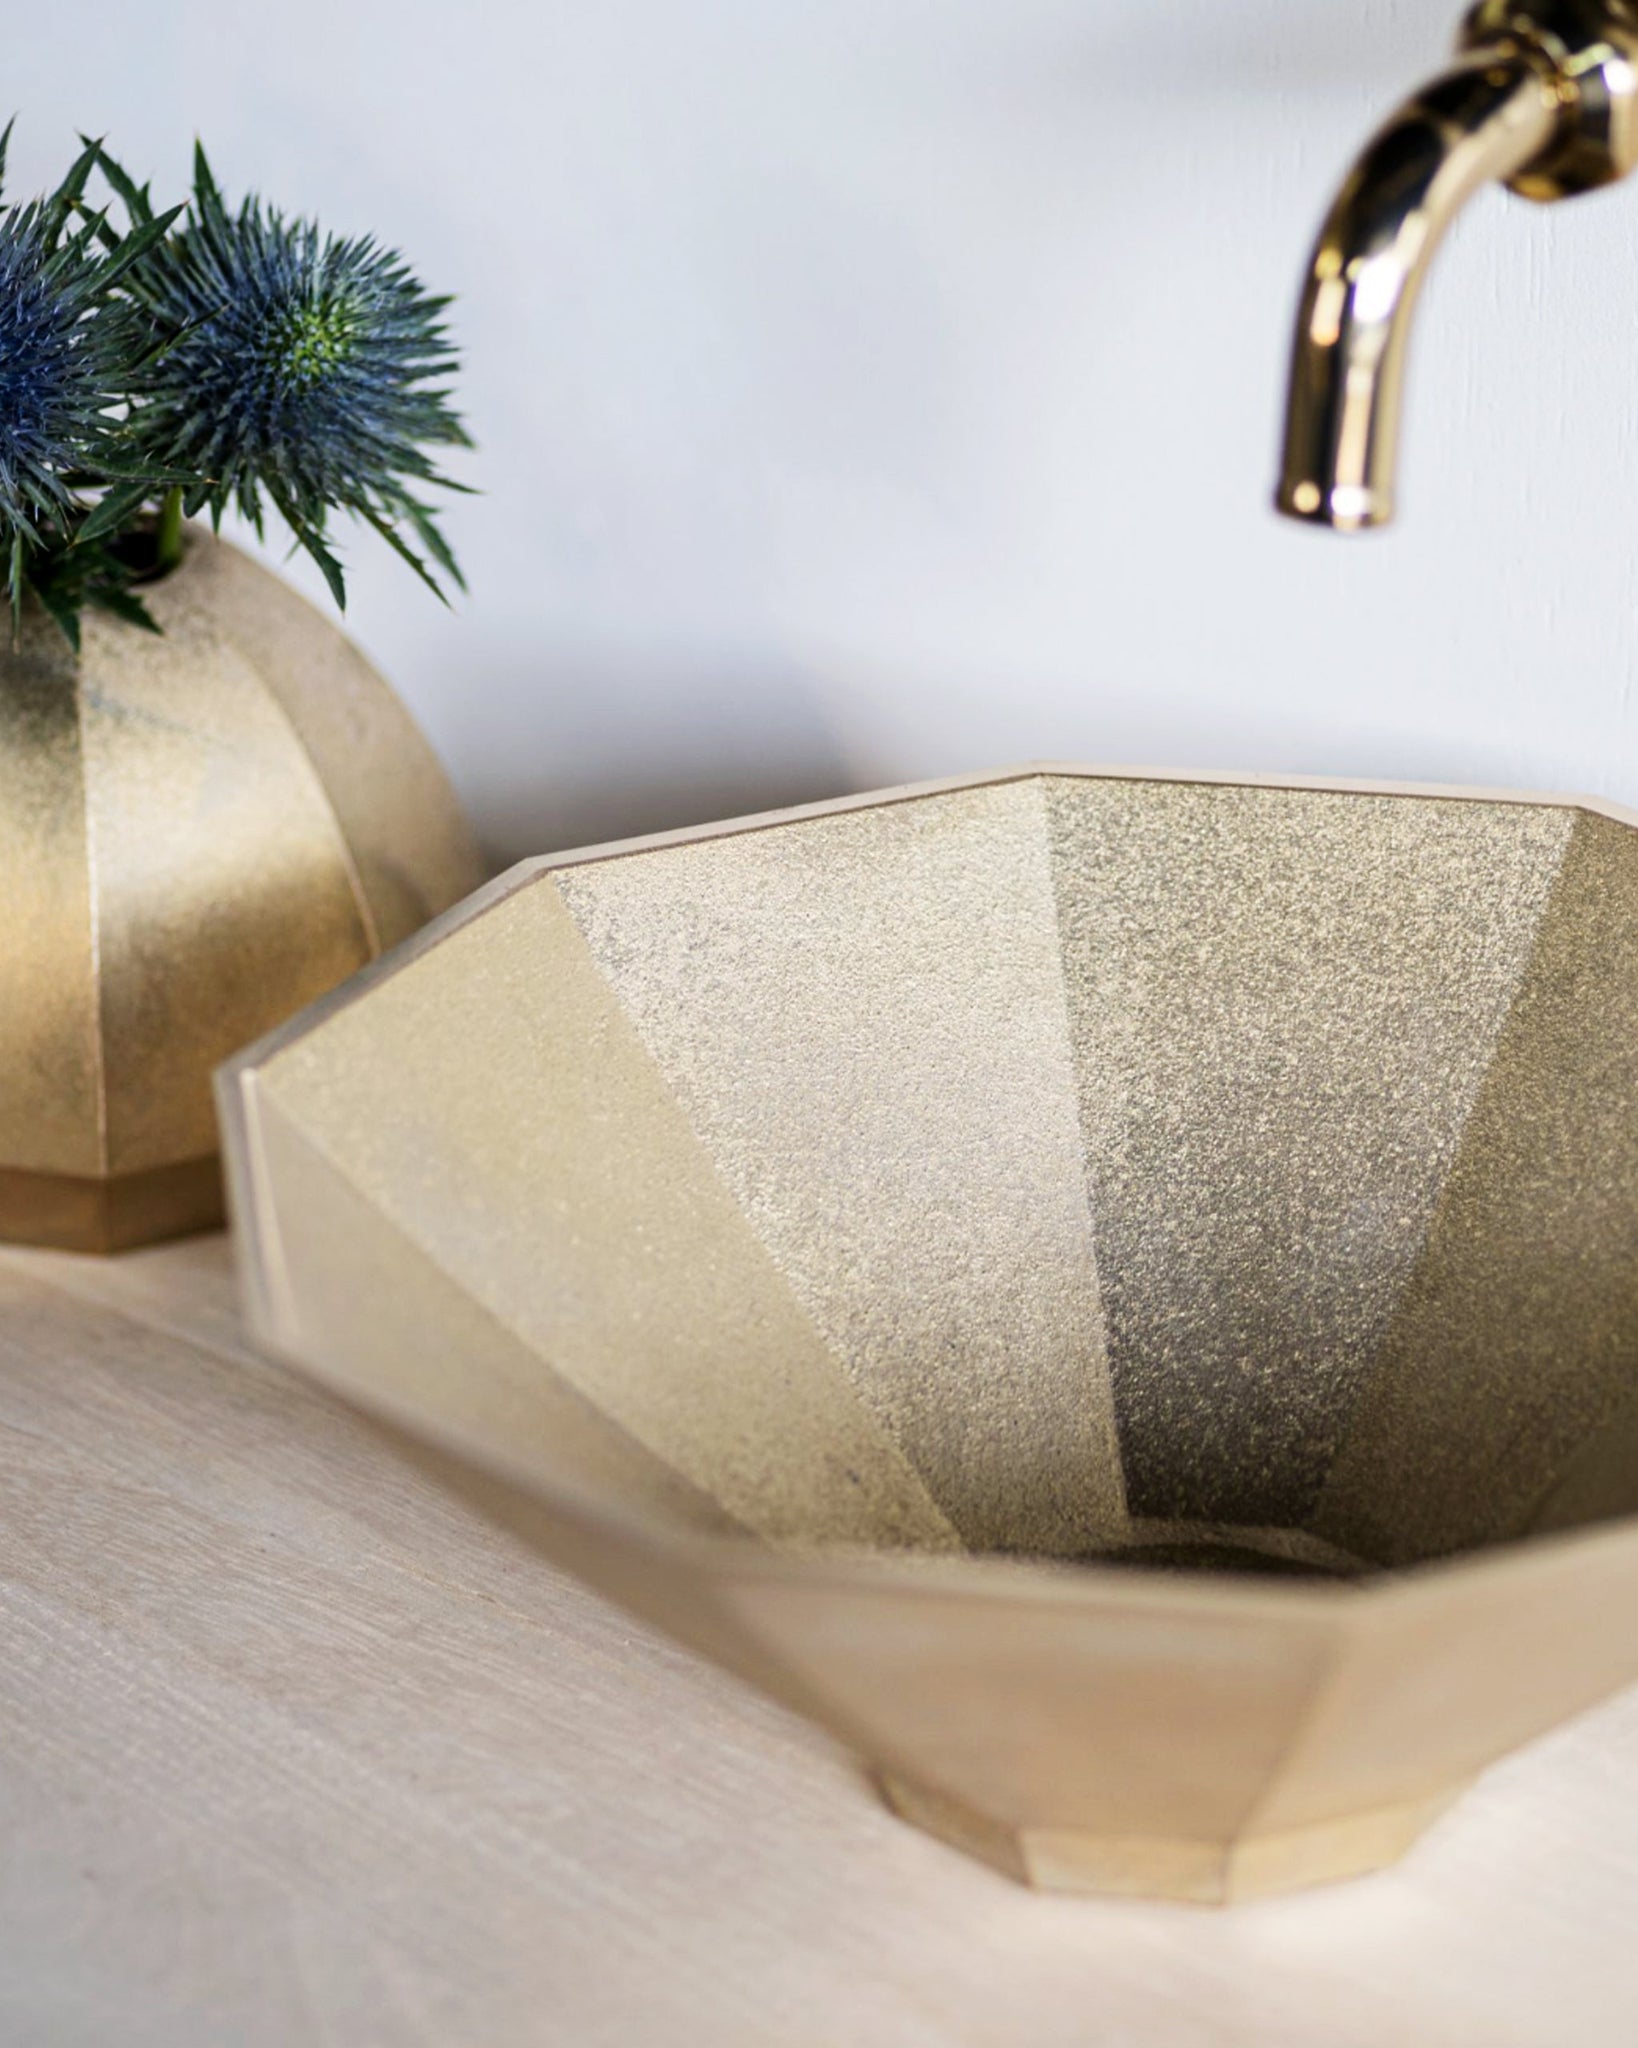 Matureware wash bowl installed on a oak wood countertop. Brass vase with blue flowers in it is placed next to the wash bowl.